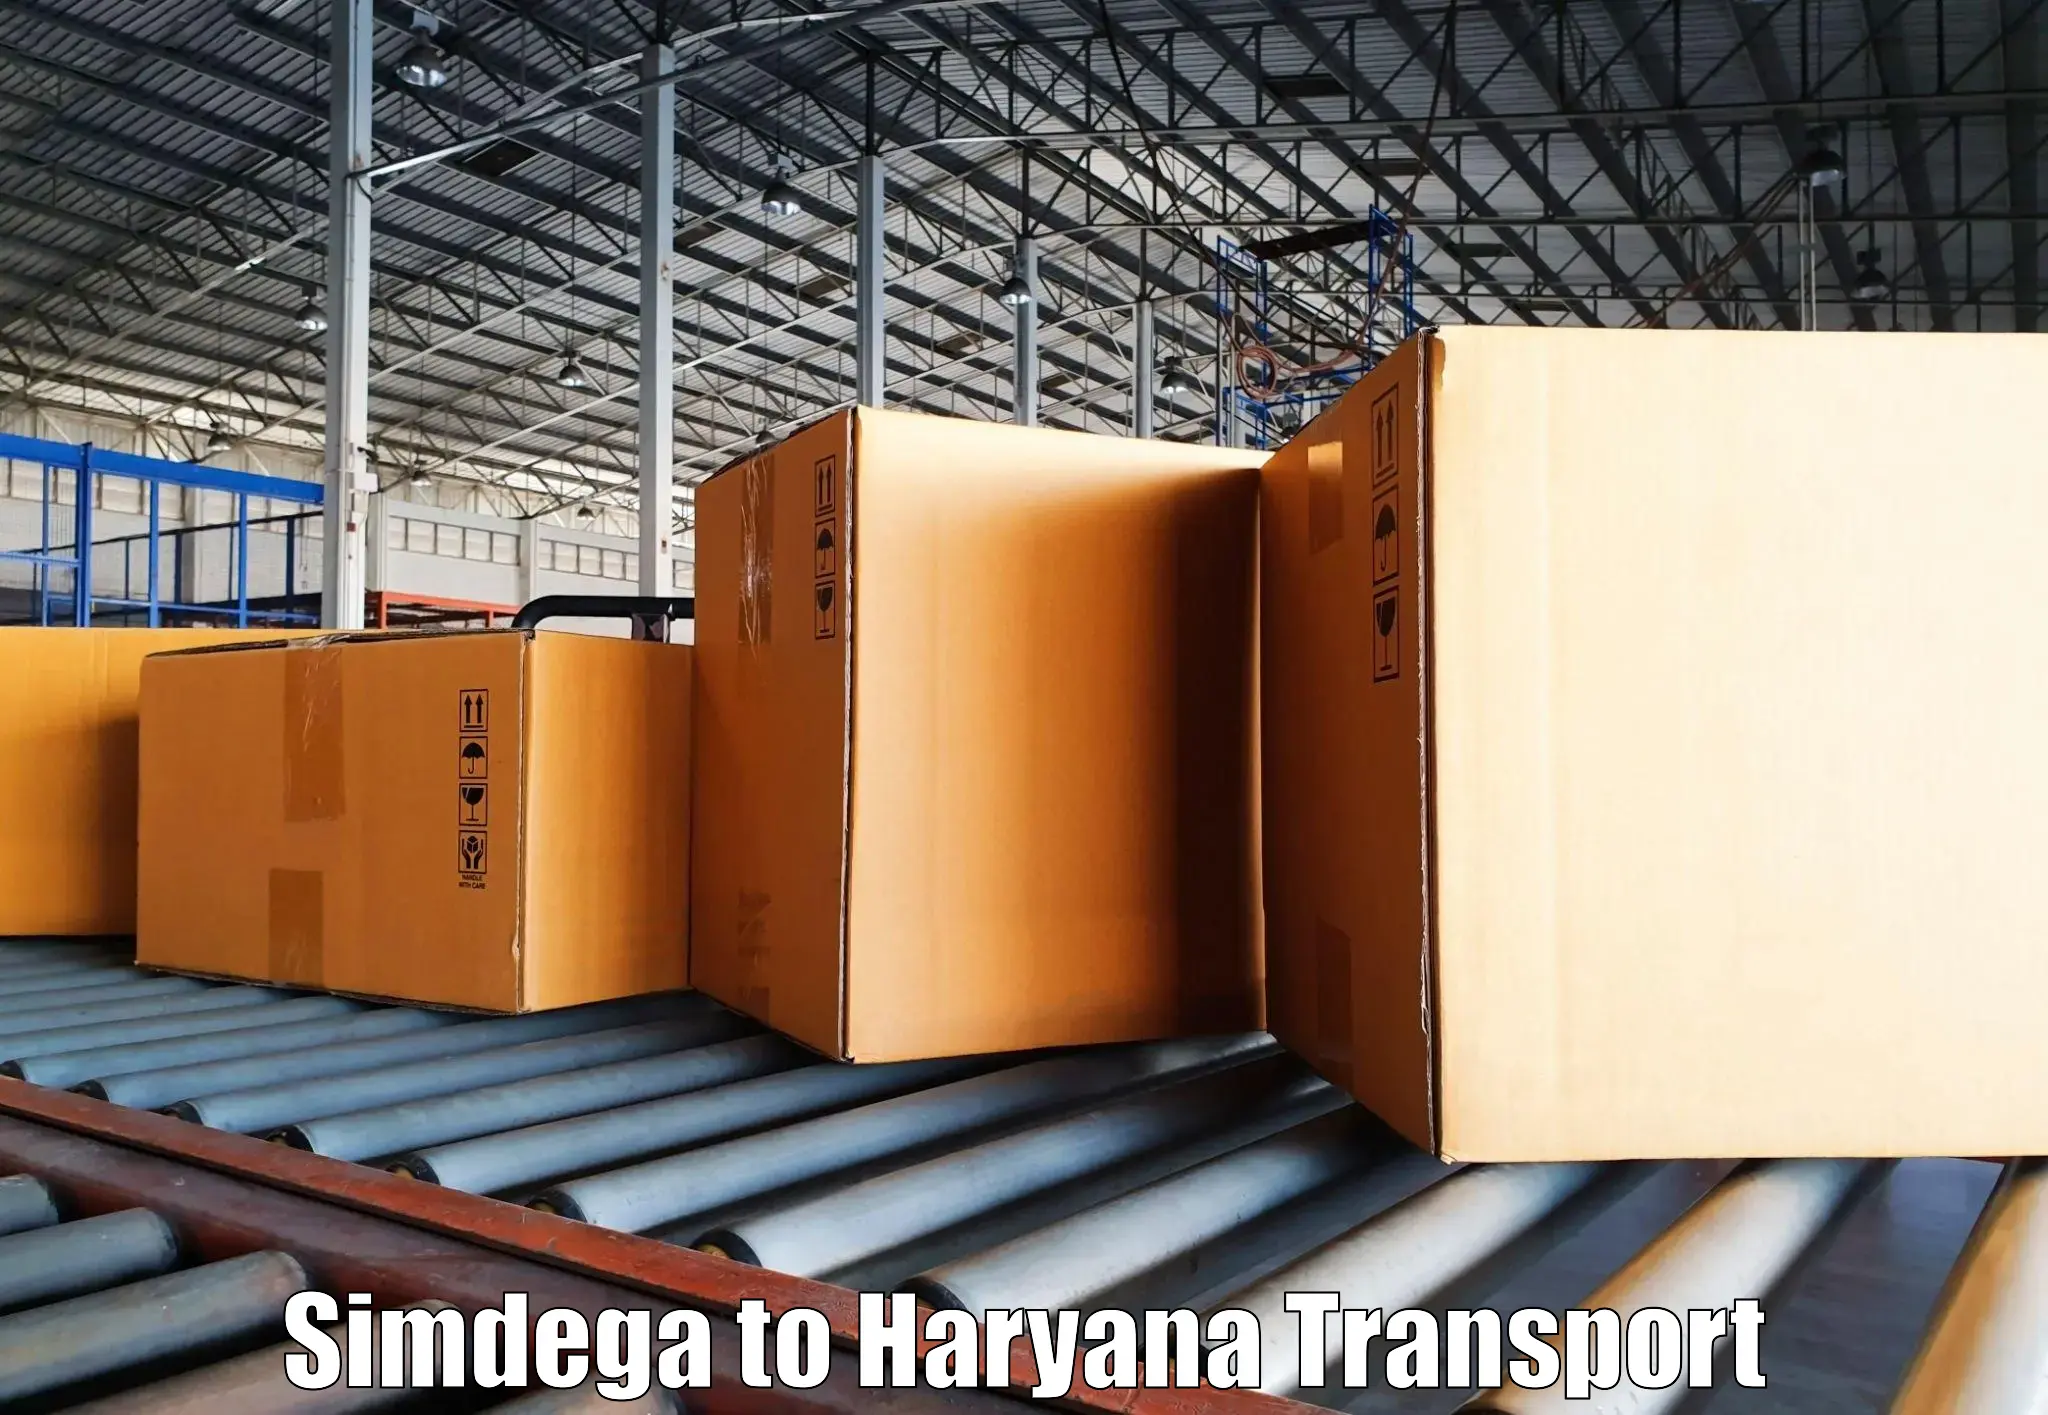 Transport bike from one state to another in Simdega to Haryana